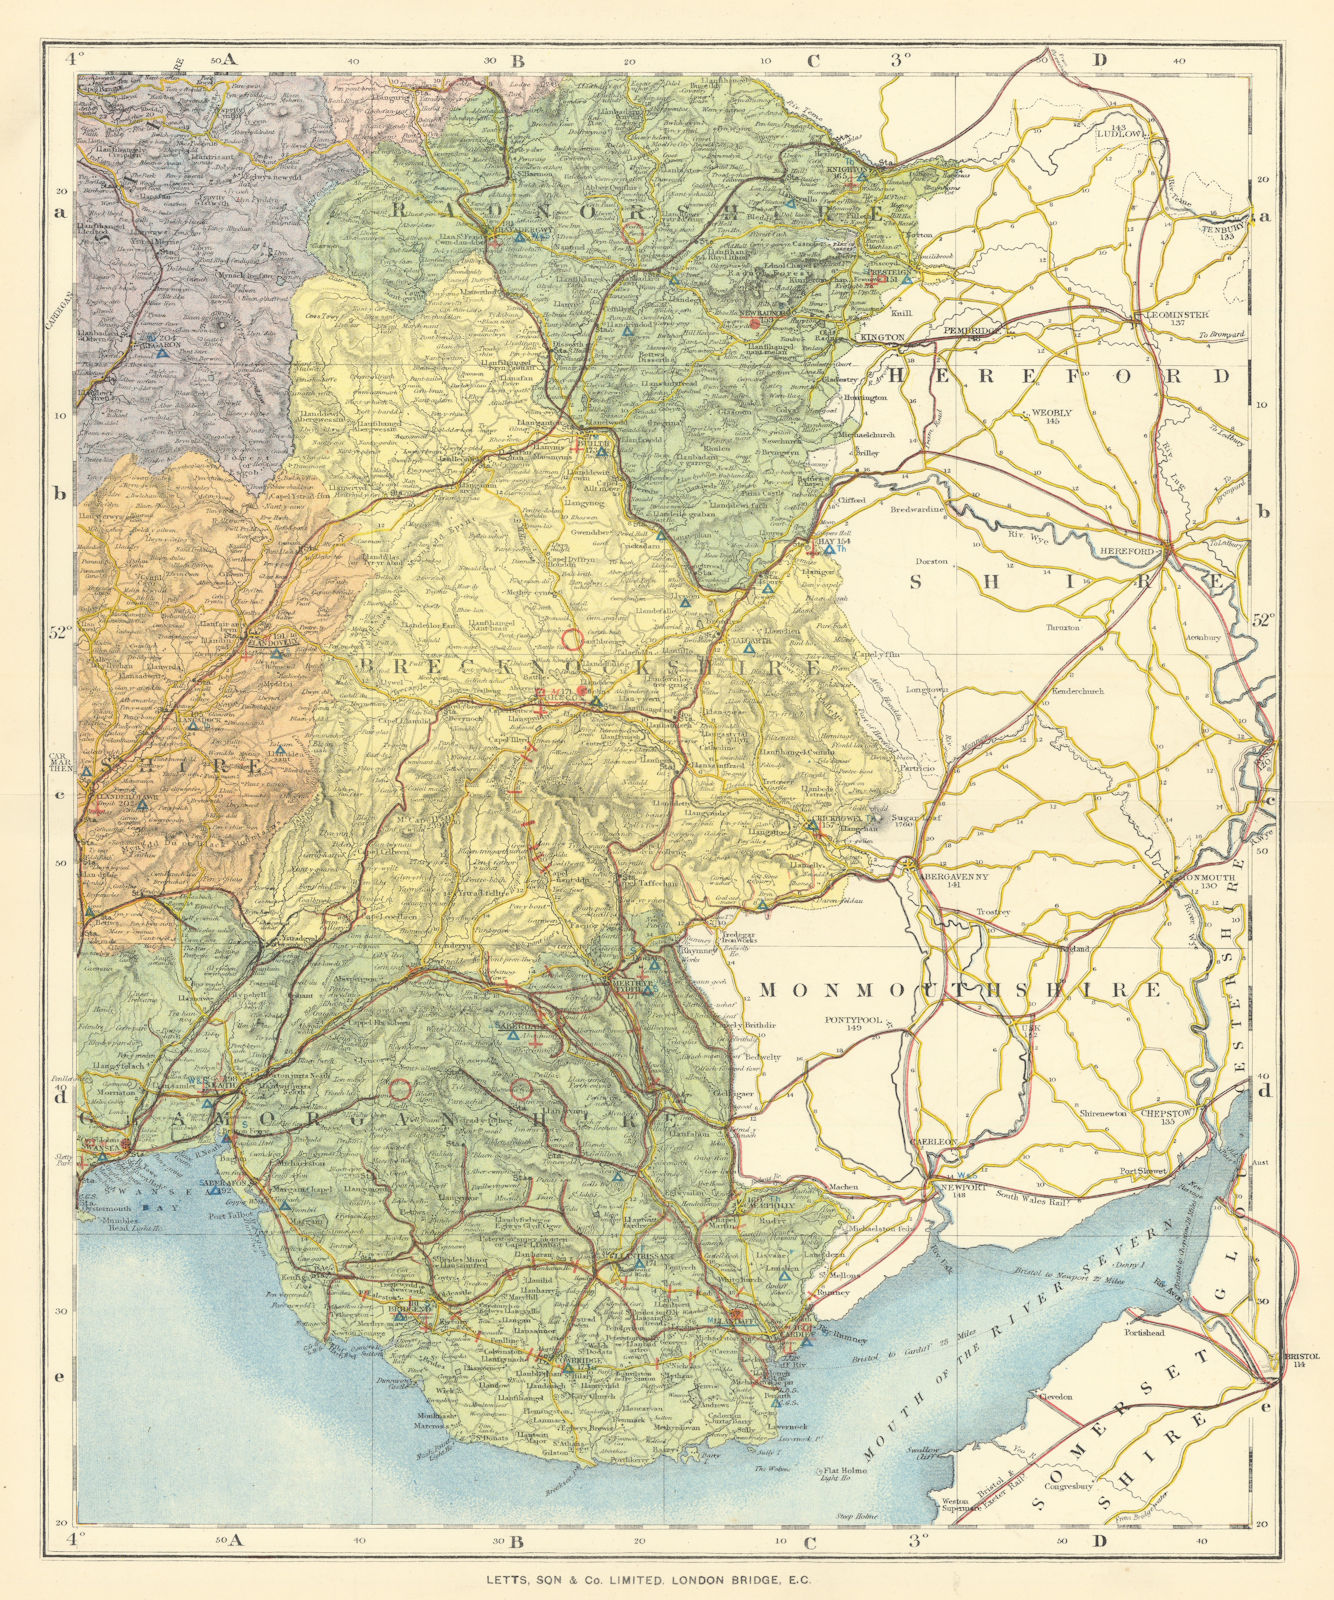 Associate Product South East Wales showing Post Towns & Market Days. LETTS 1884 old antique map